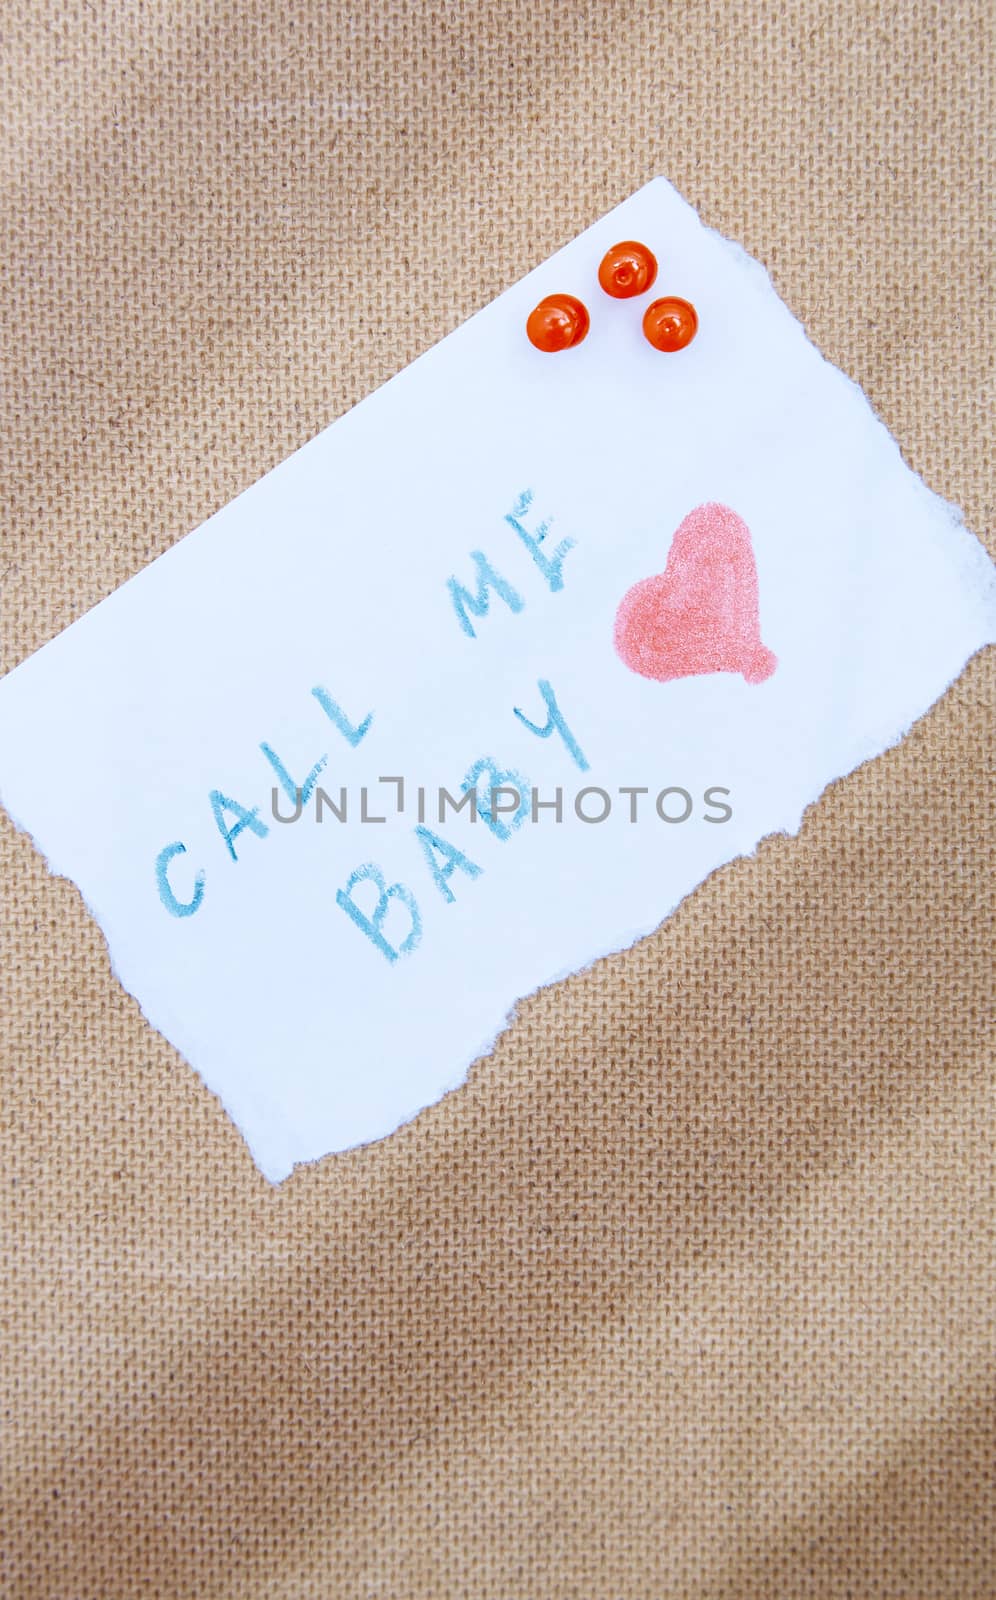 Call me written on a paper attached by pushpins to the wooden bulletin board